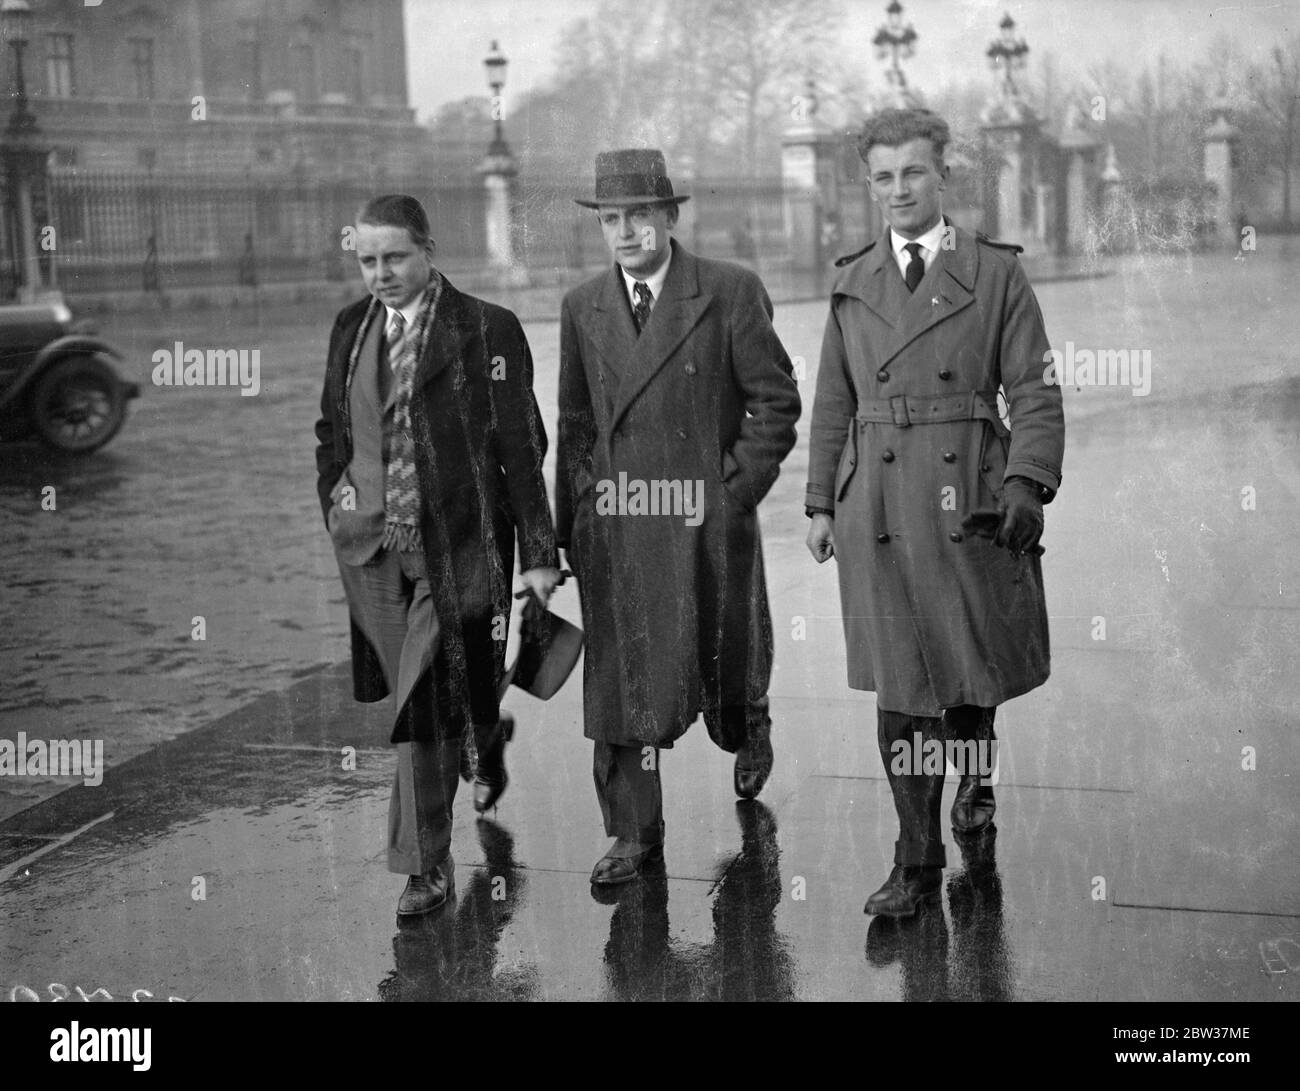 Leader of German Nazi youth in London . Alliance with British youth movement . Herr Nabersberg , an official of the Nazi youth movement , is visiting London . He desires to establish some kind of permanent relations between the youth movements of Britain and Germany , and has arranged to see a leading official of the Boy Scout movement . Herr Nabersberg ( with scarf and without hat ) walking with friends near Buckingham Palace . 15 January 1934 Stock Photo